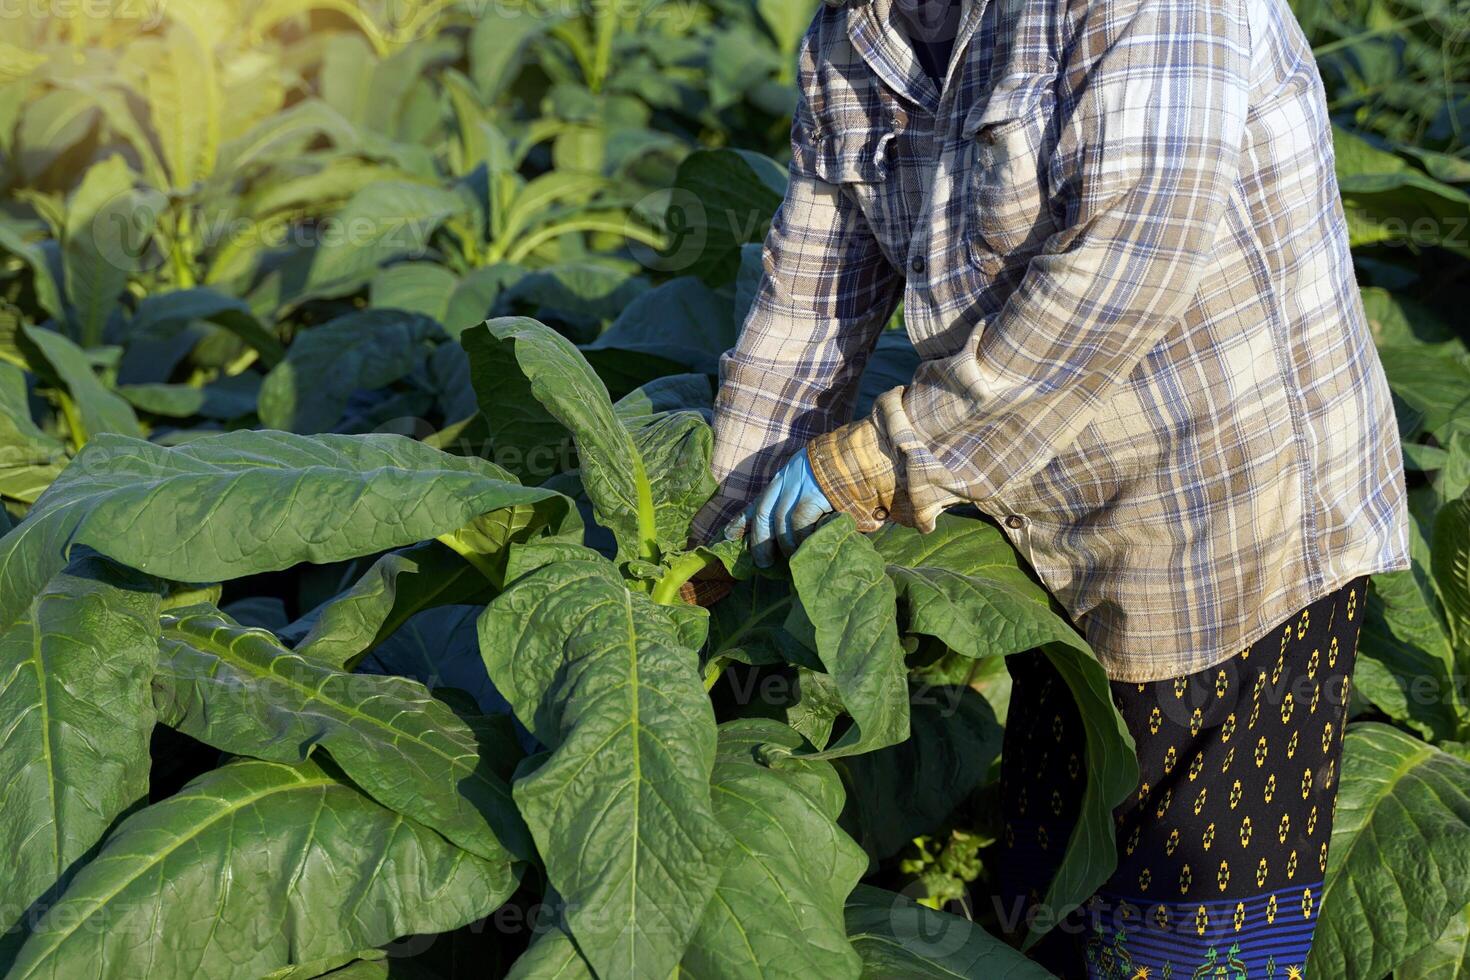 Gardeners pluck the young leaves of tobacco so that the fertilizer is applied to only the leaves that are needed. It is to control the height. To get the existing leaves to have large leaves. photo